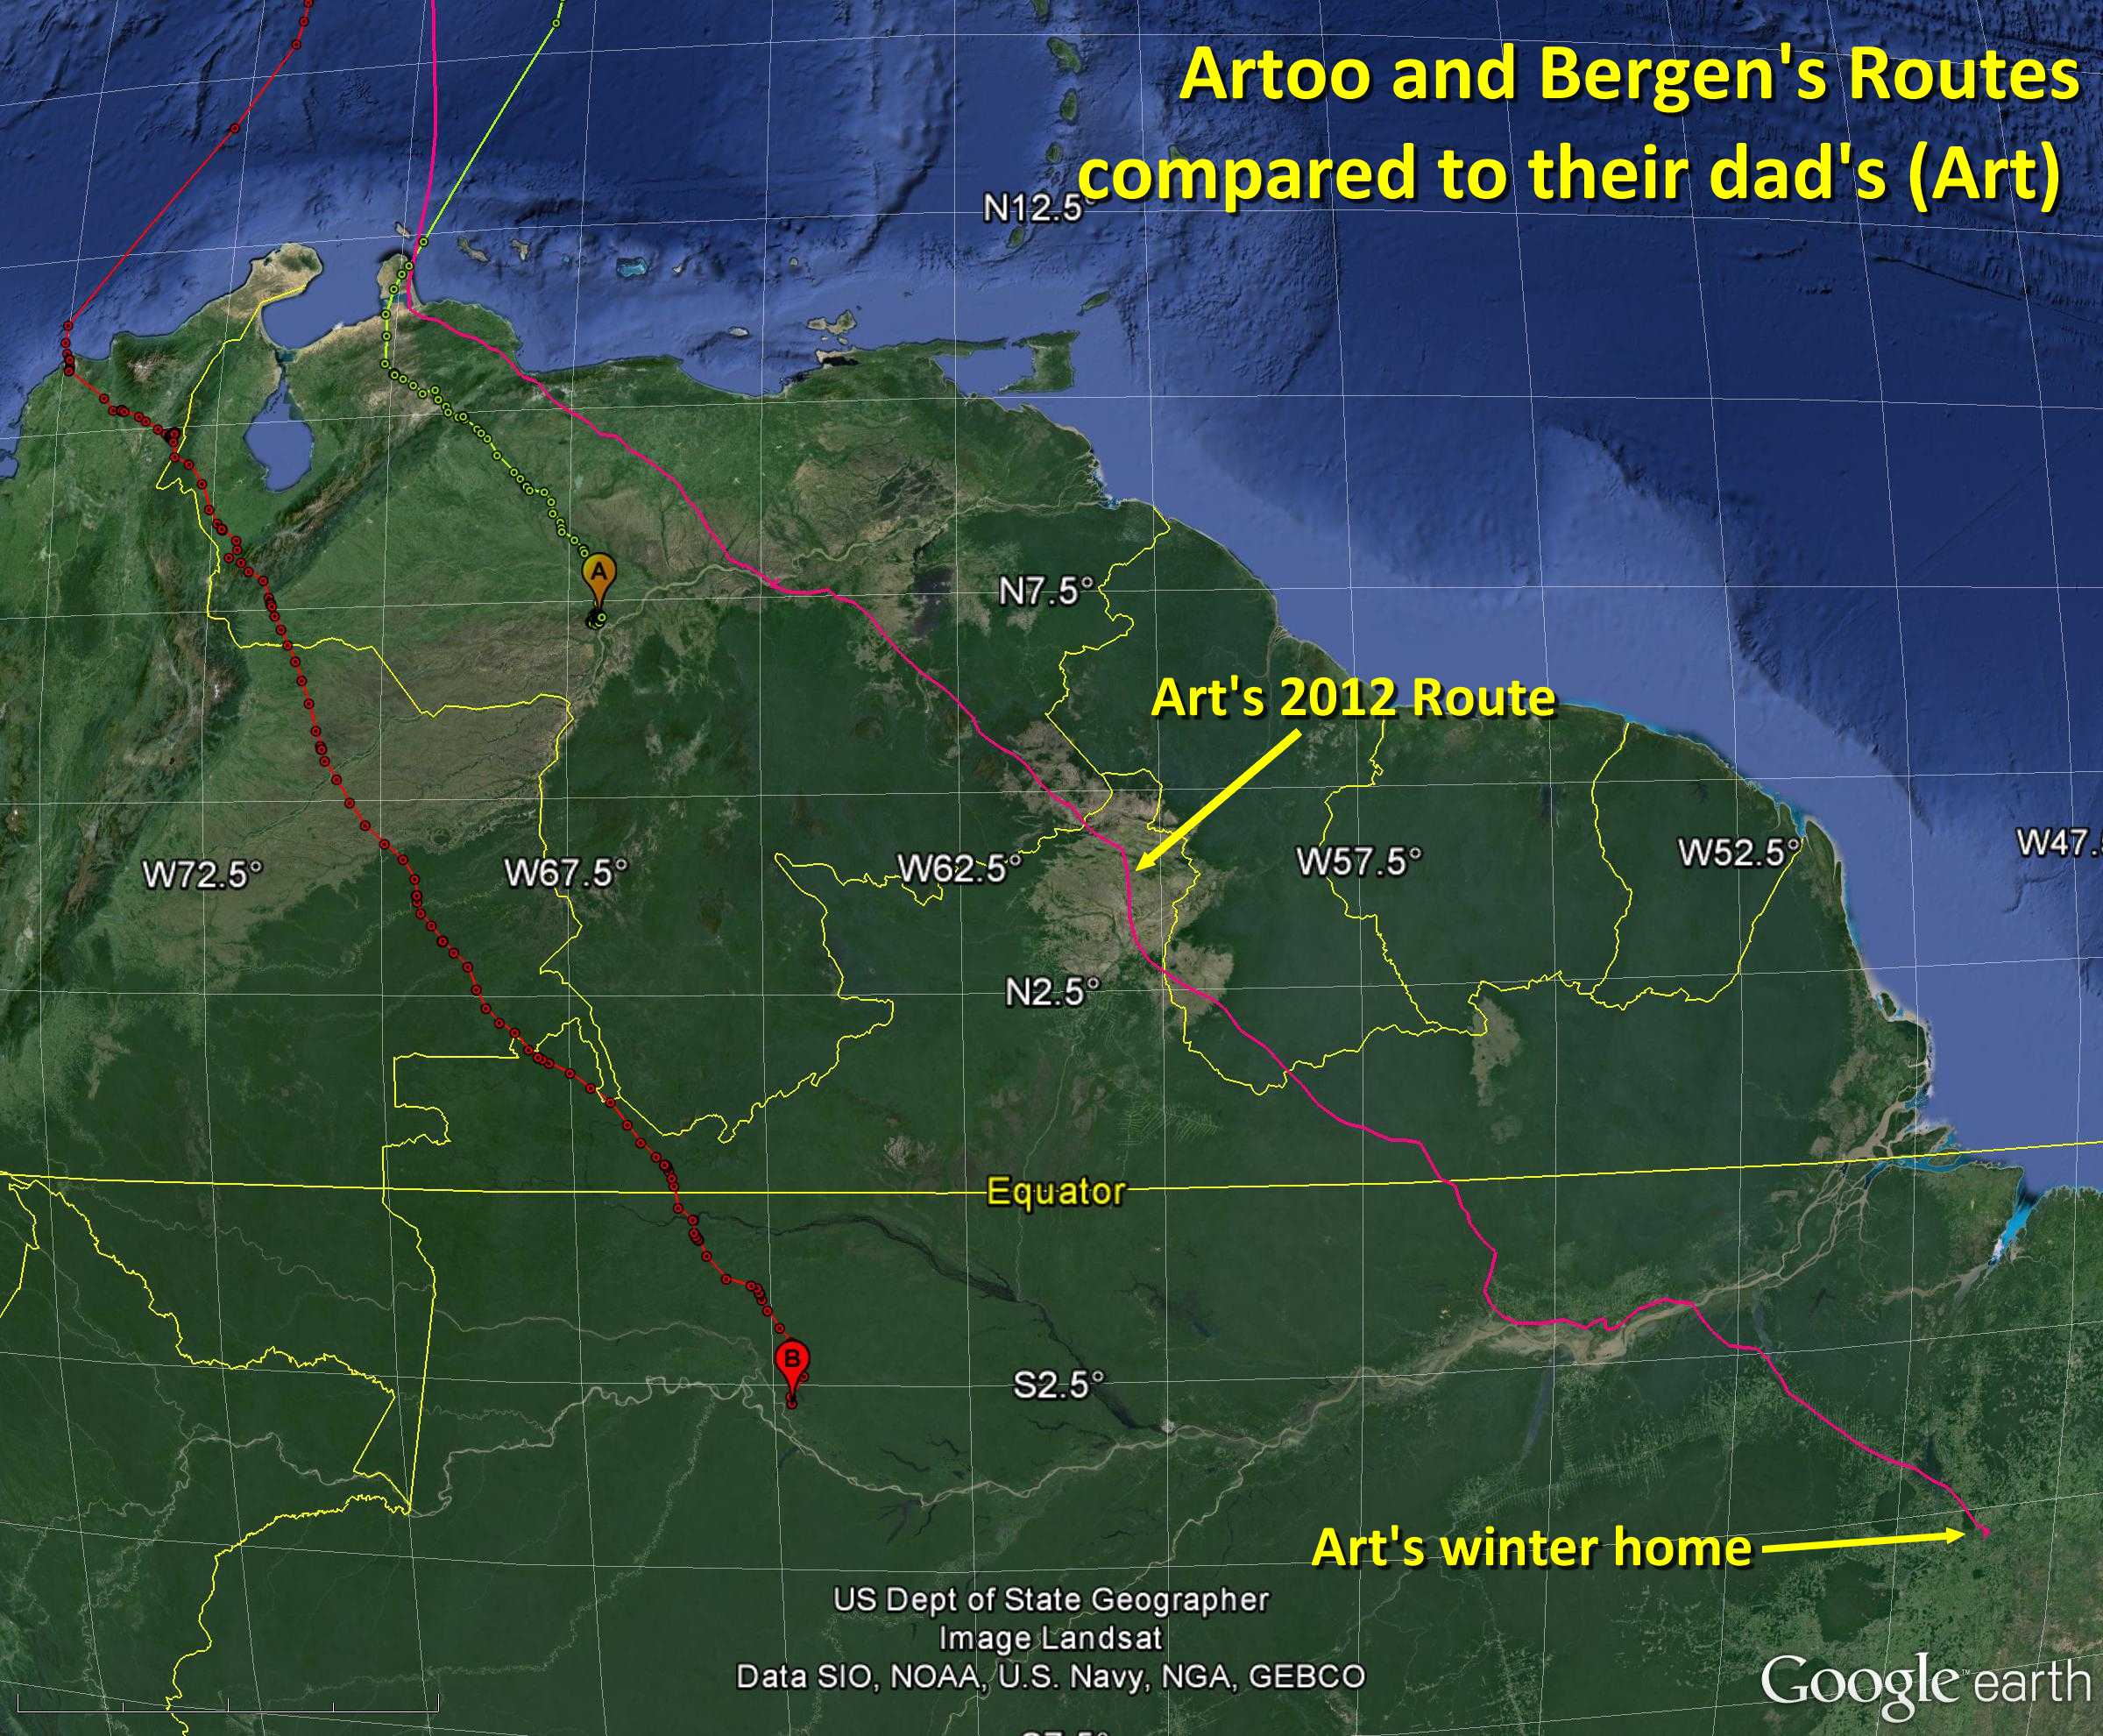 Artoo and Bergen, and Art's Route - November 8, 2013